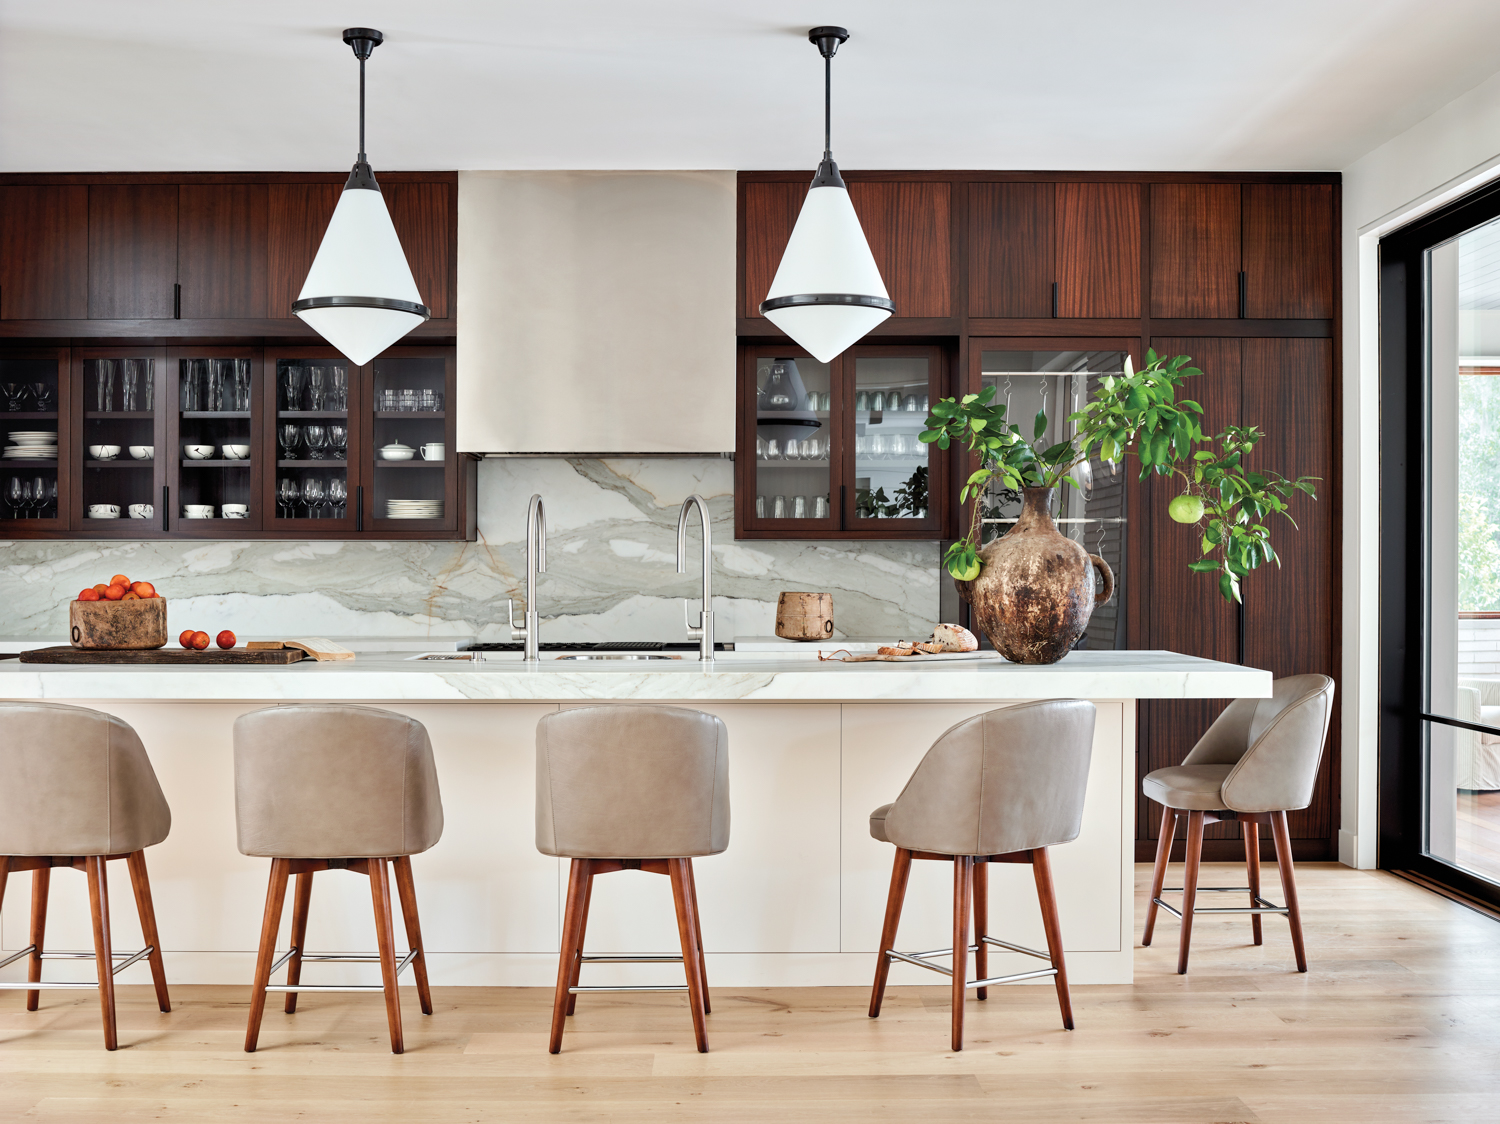 Kitchen with leather counter stools, white pendant lights and rich-toned wood cabinetry